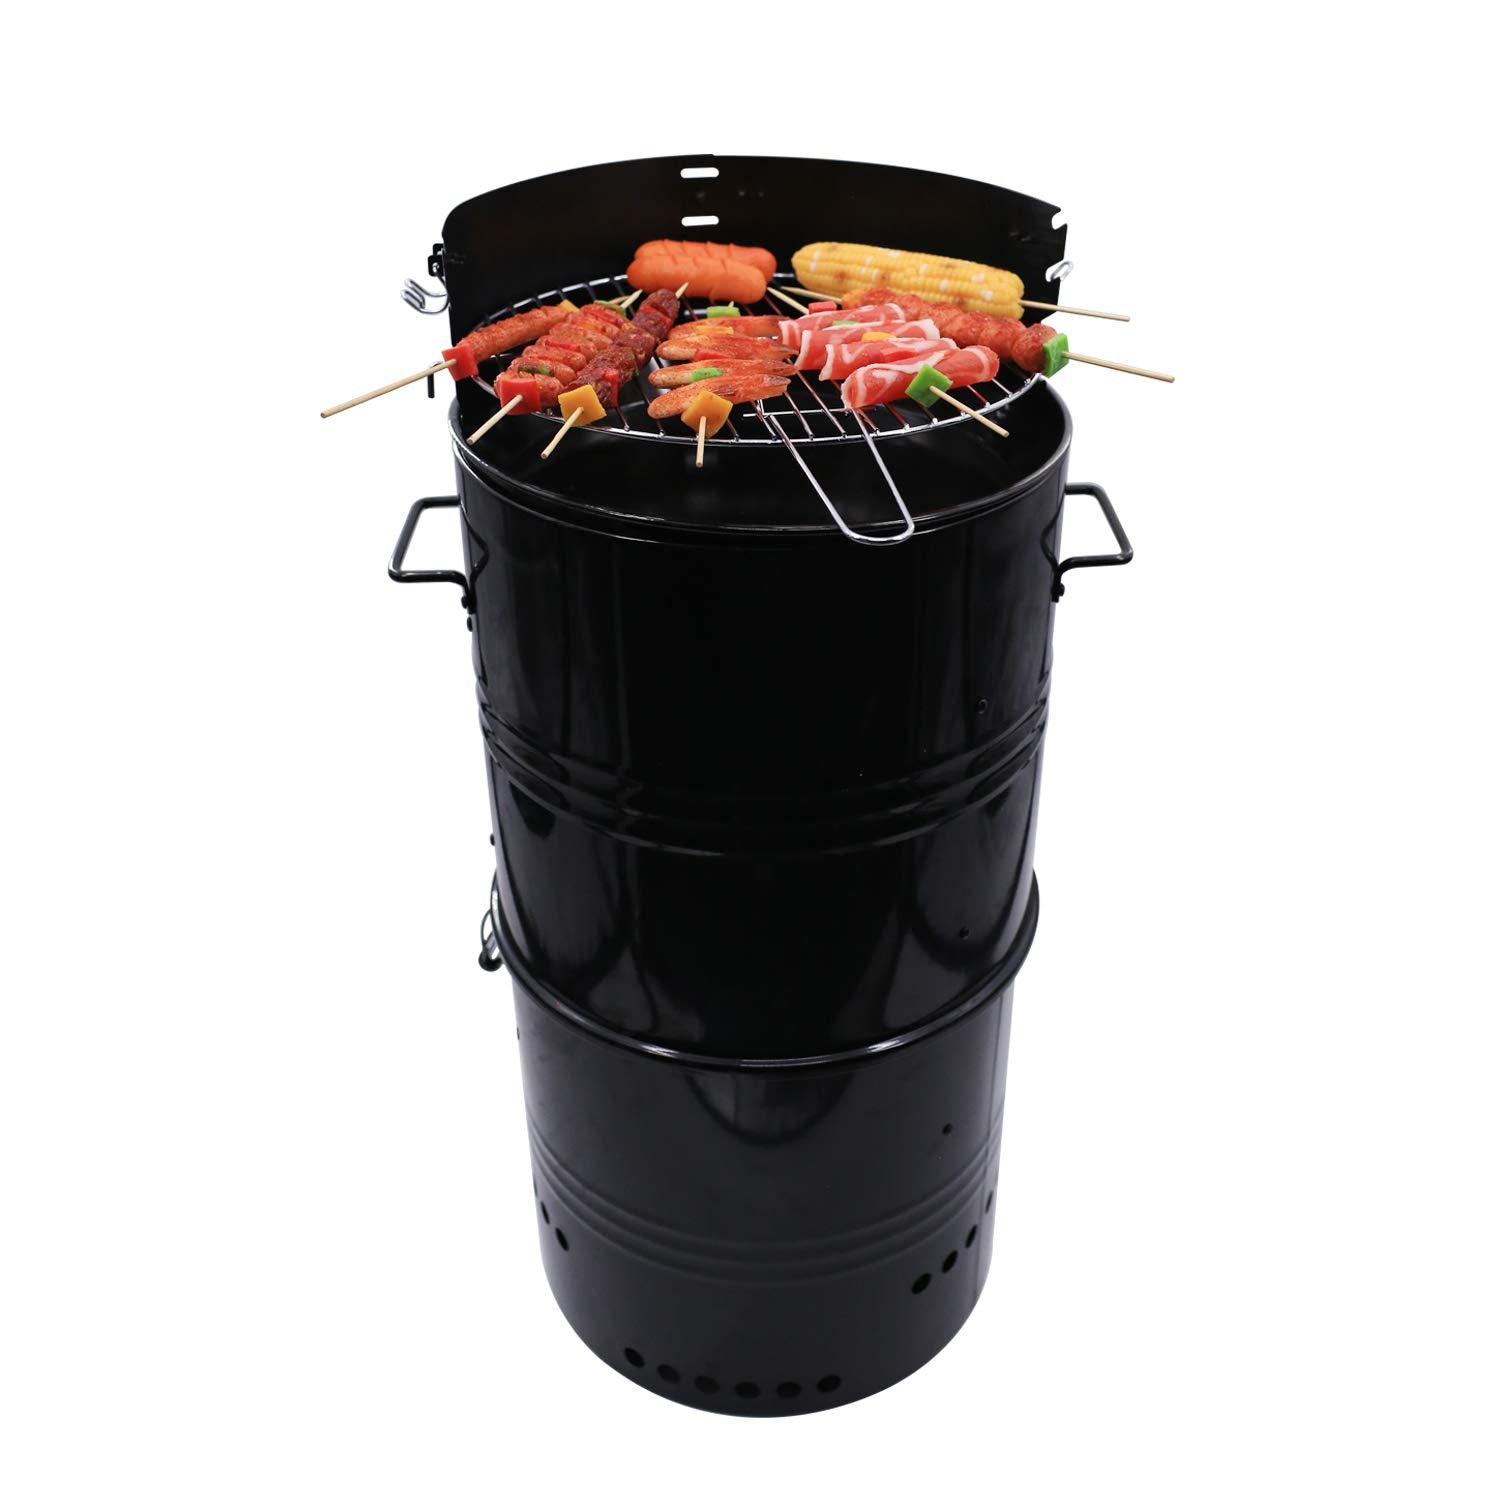 Hakka Vertical Charcoal Smoker, Multi-Function 18 Inch Barbecue and Charcoal Smoker Grill Heavy Duty Round BBQ Grill for Outdoor Cooking Camping